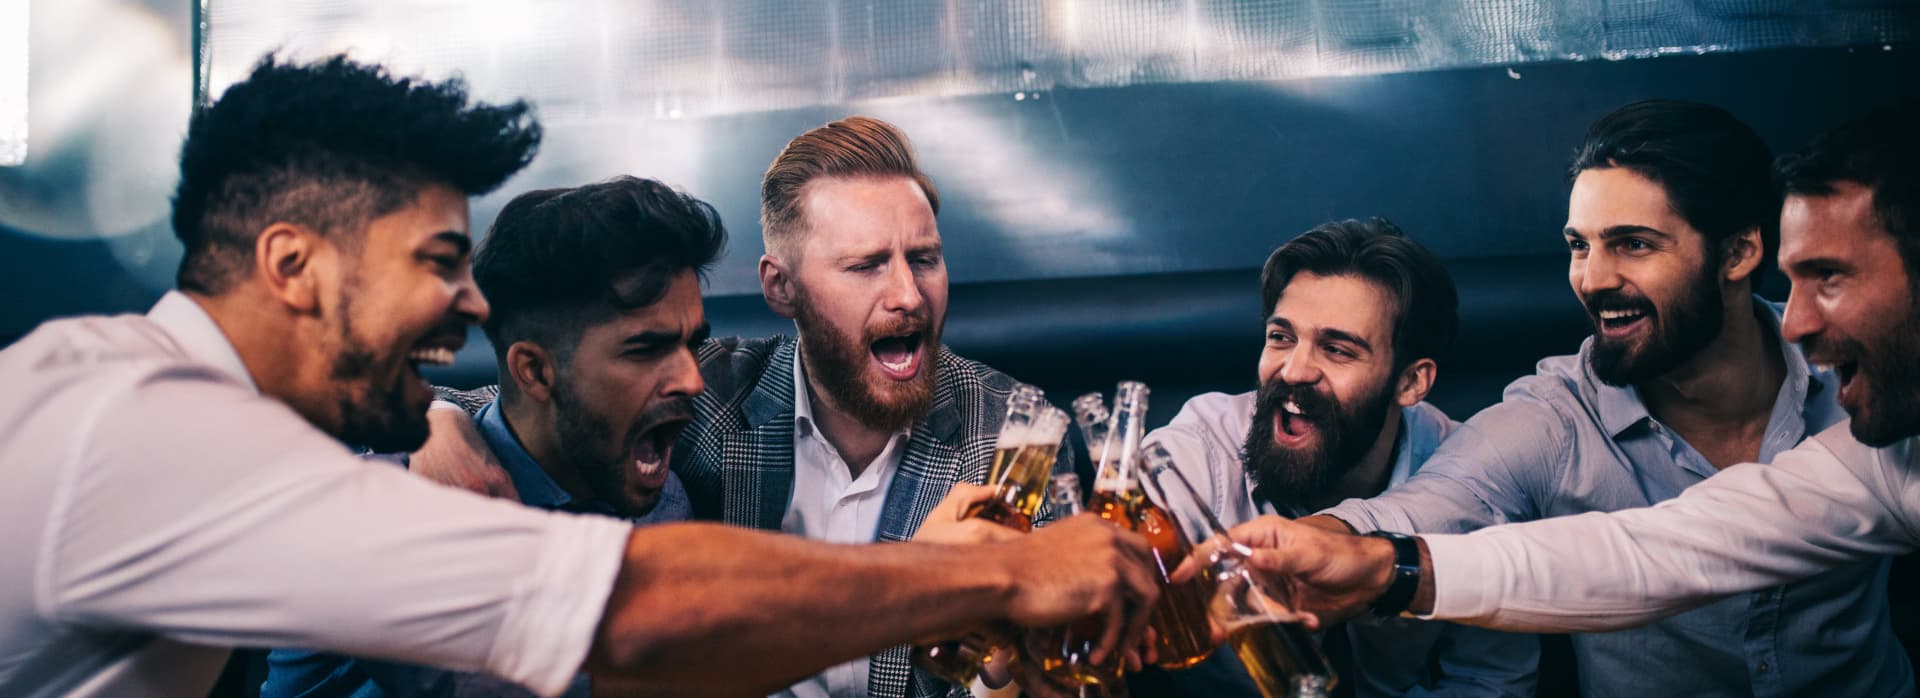 Group of young men toasting with beer at a nightclub